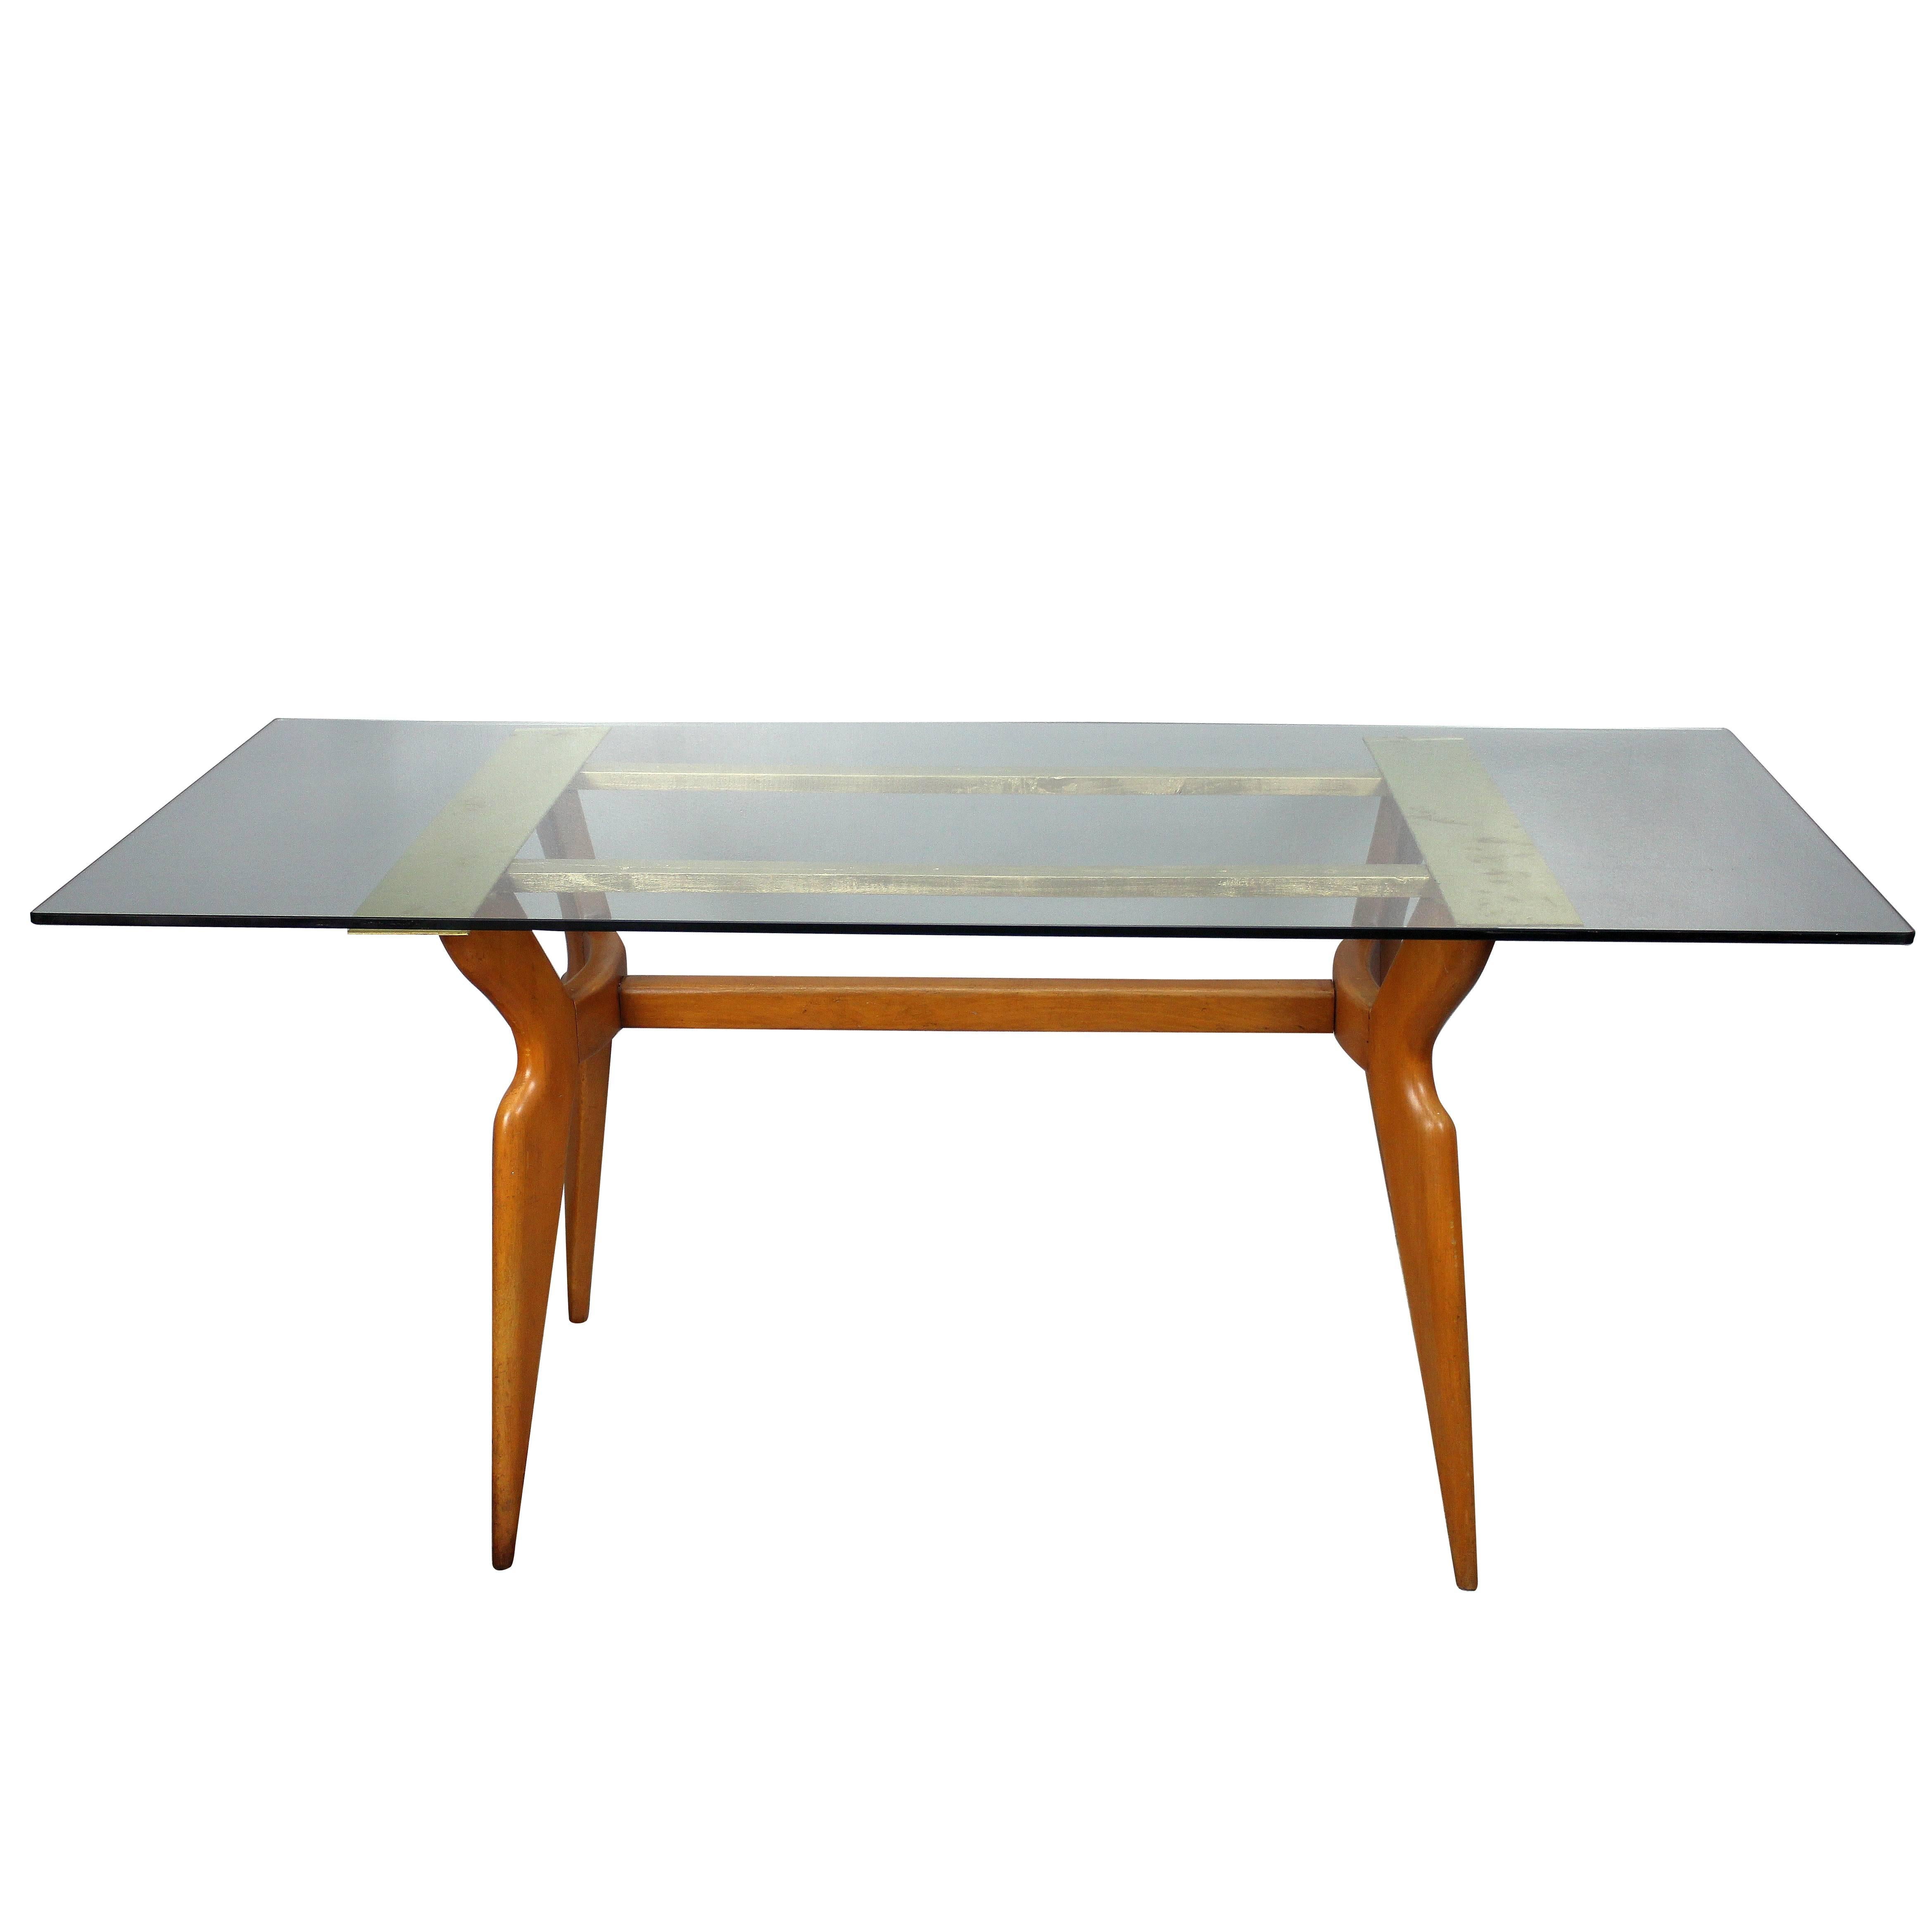 Italian Dining Room Table in Style of Gio Ponti